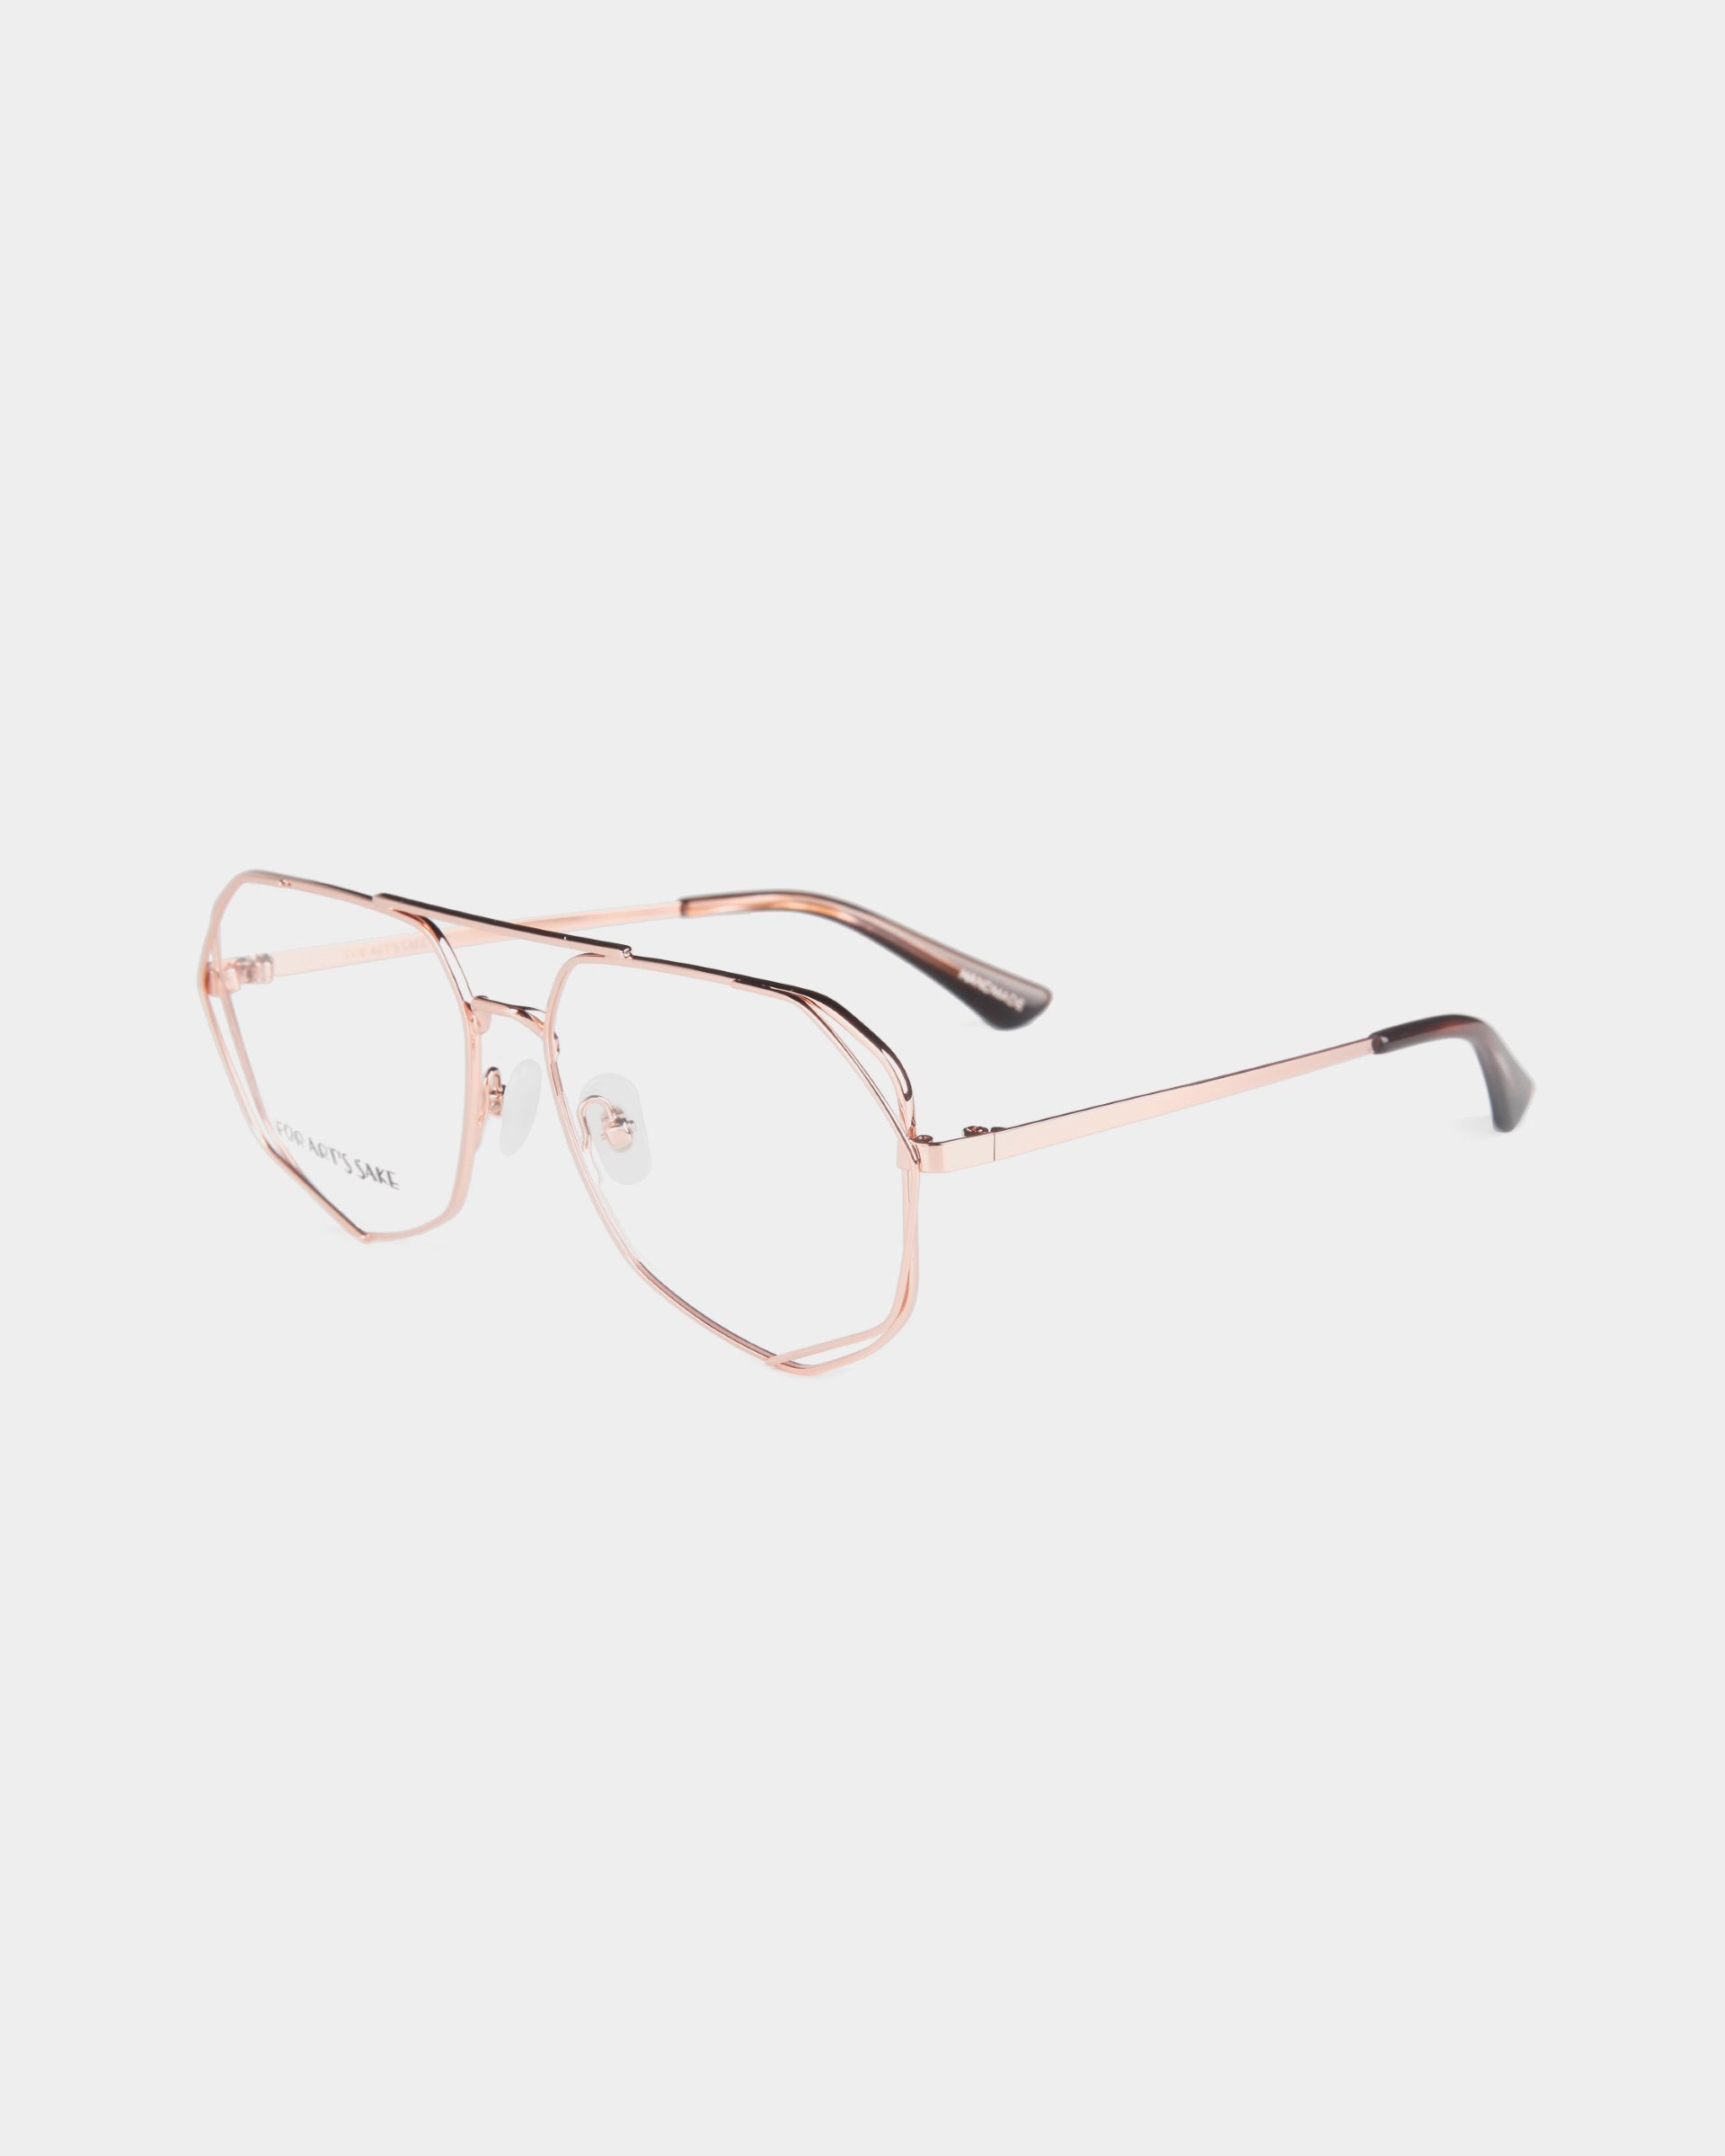 A pair of aviator-style Genius eyeglasses by For Art&#39;s Sake® with thin, rose gold metal frames and clear lenses featuring black tips on the temple arms. The design includes a double bridge and adjustable nose pads, offering the option for a Blue Light Filter. The background is white.